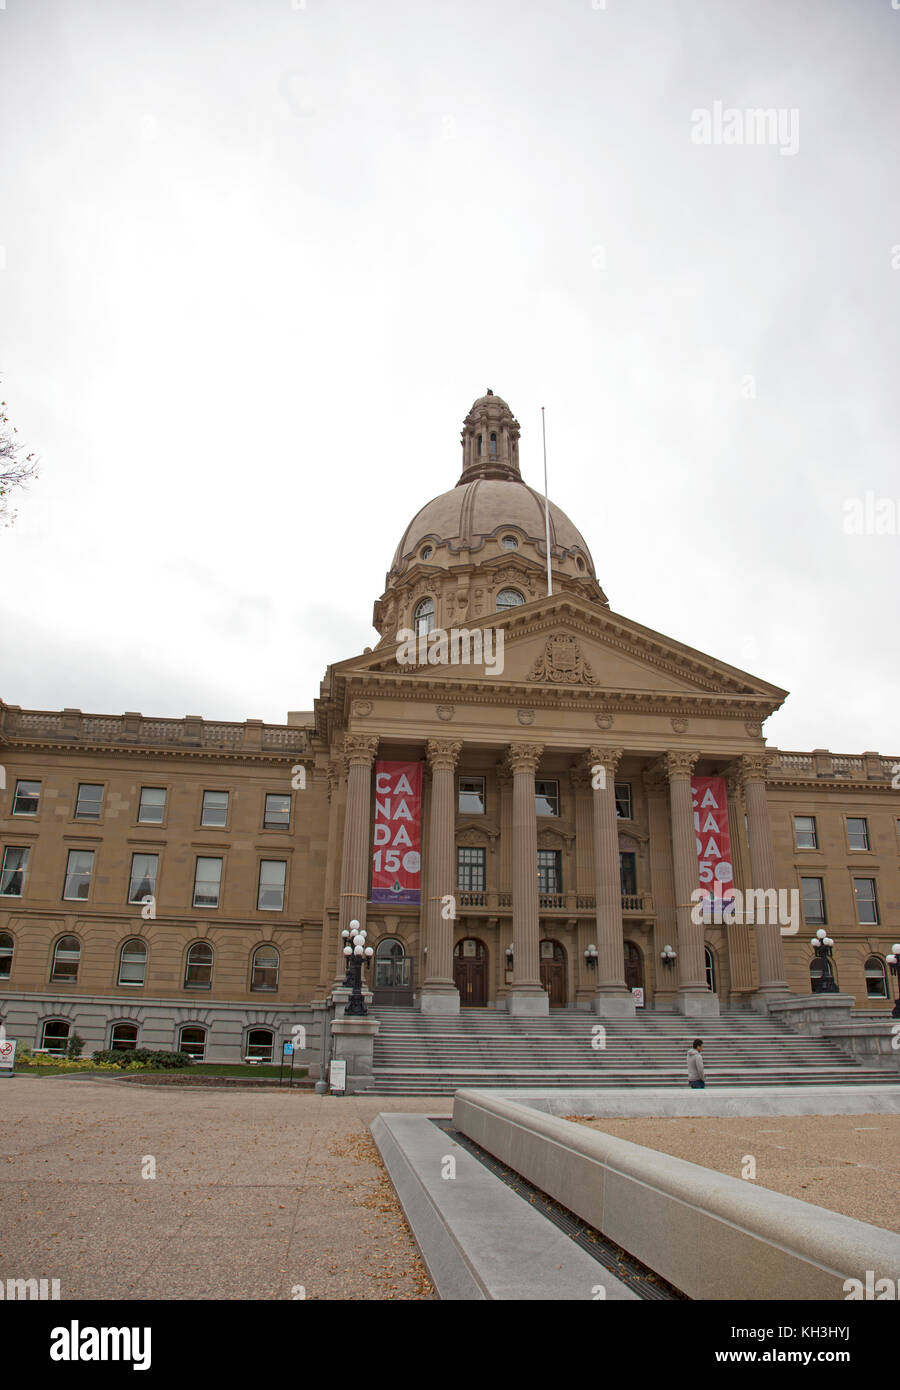 On October 6, 2017: Editorial view of the dome and columns of Edmonton's legislature building Stock Photo